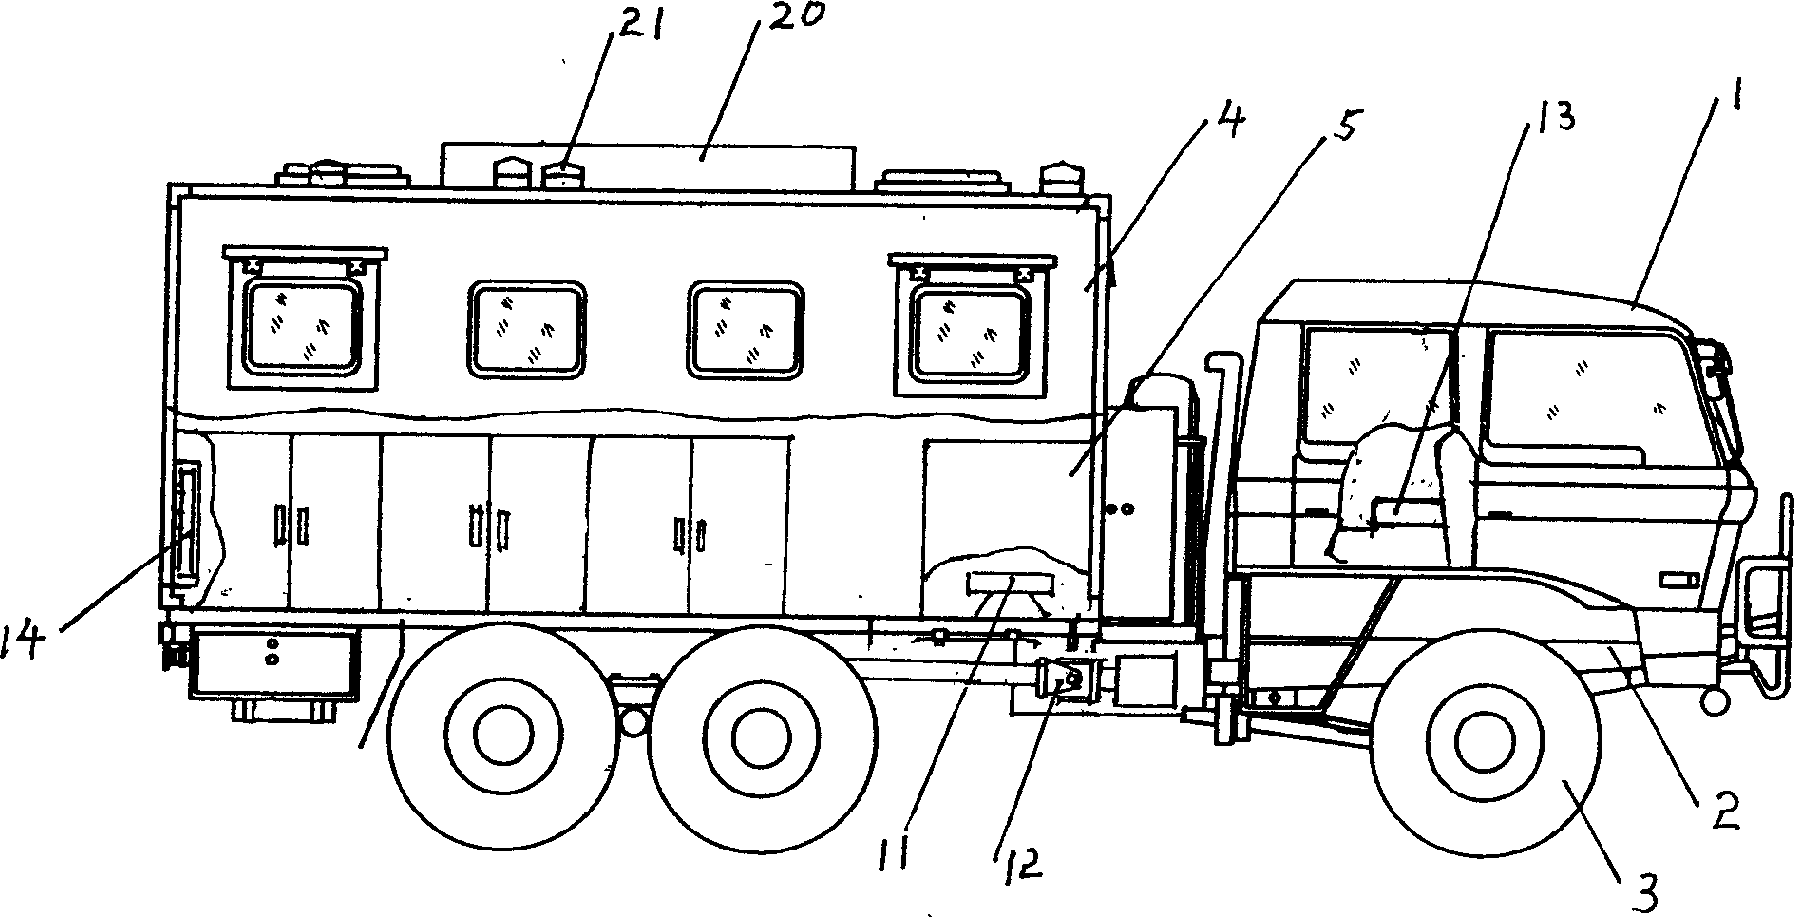 Cross-country self-propelled cooking vehicle